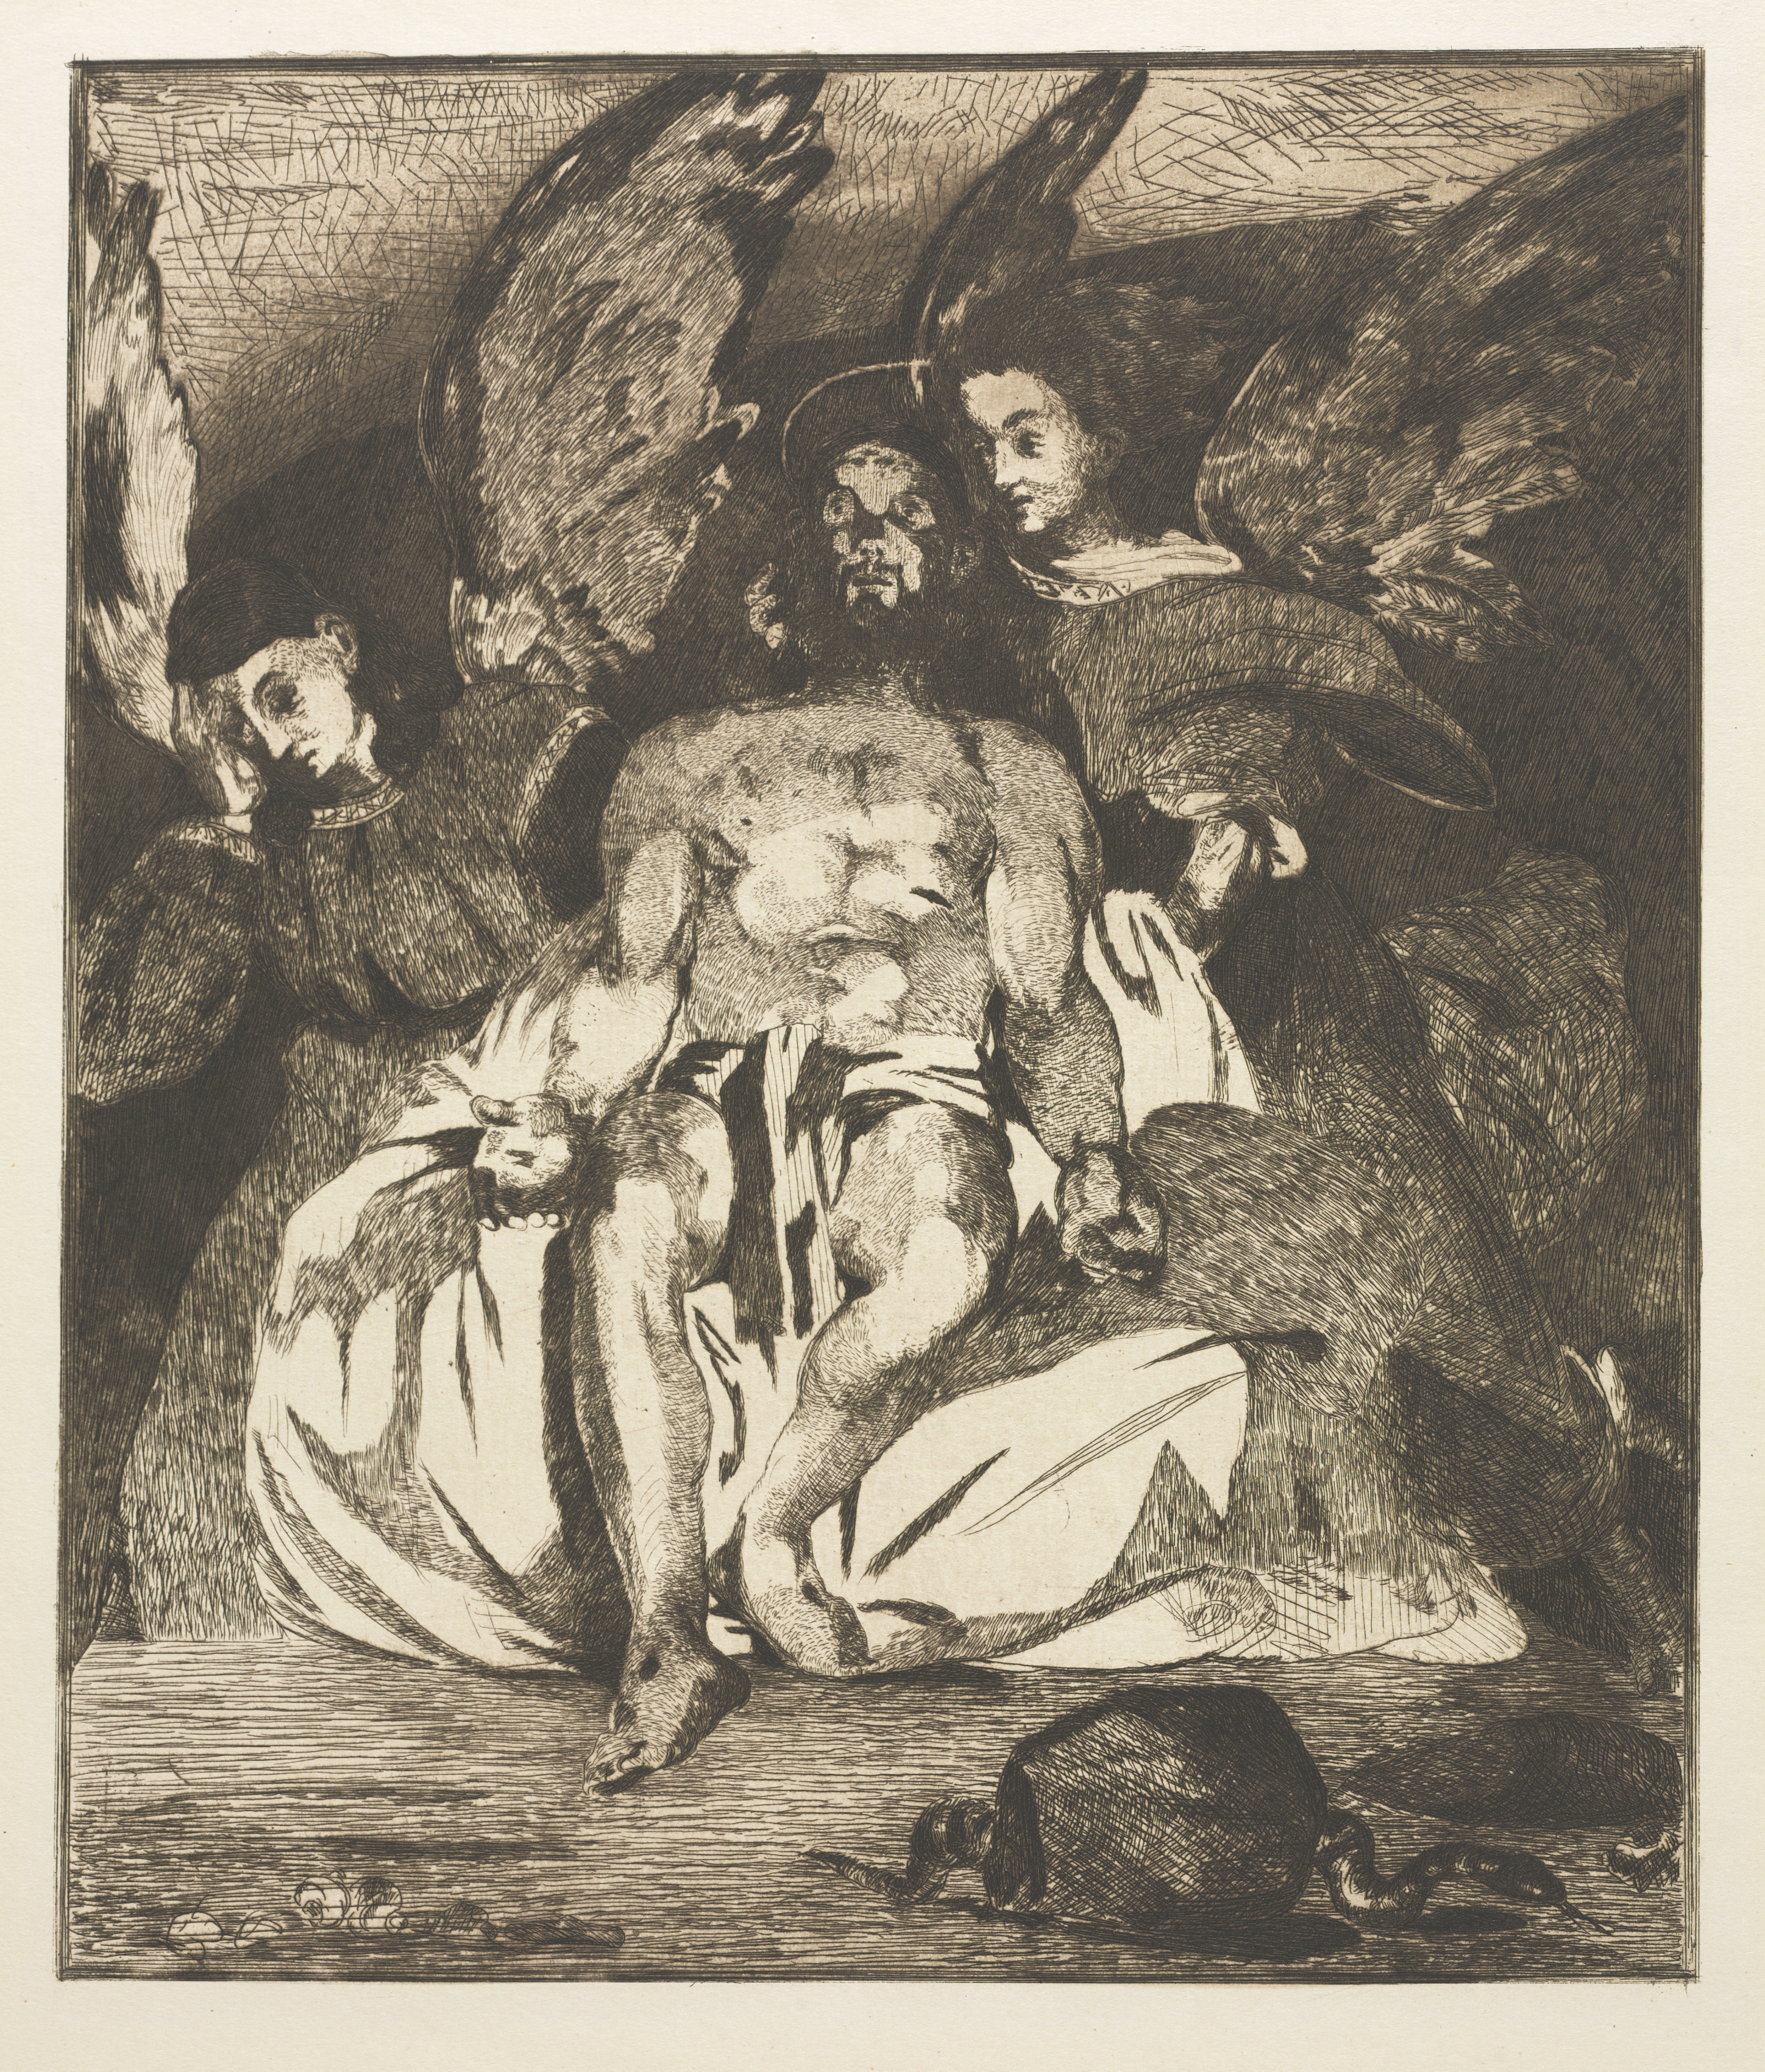 The Dead Christ with Angels